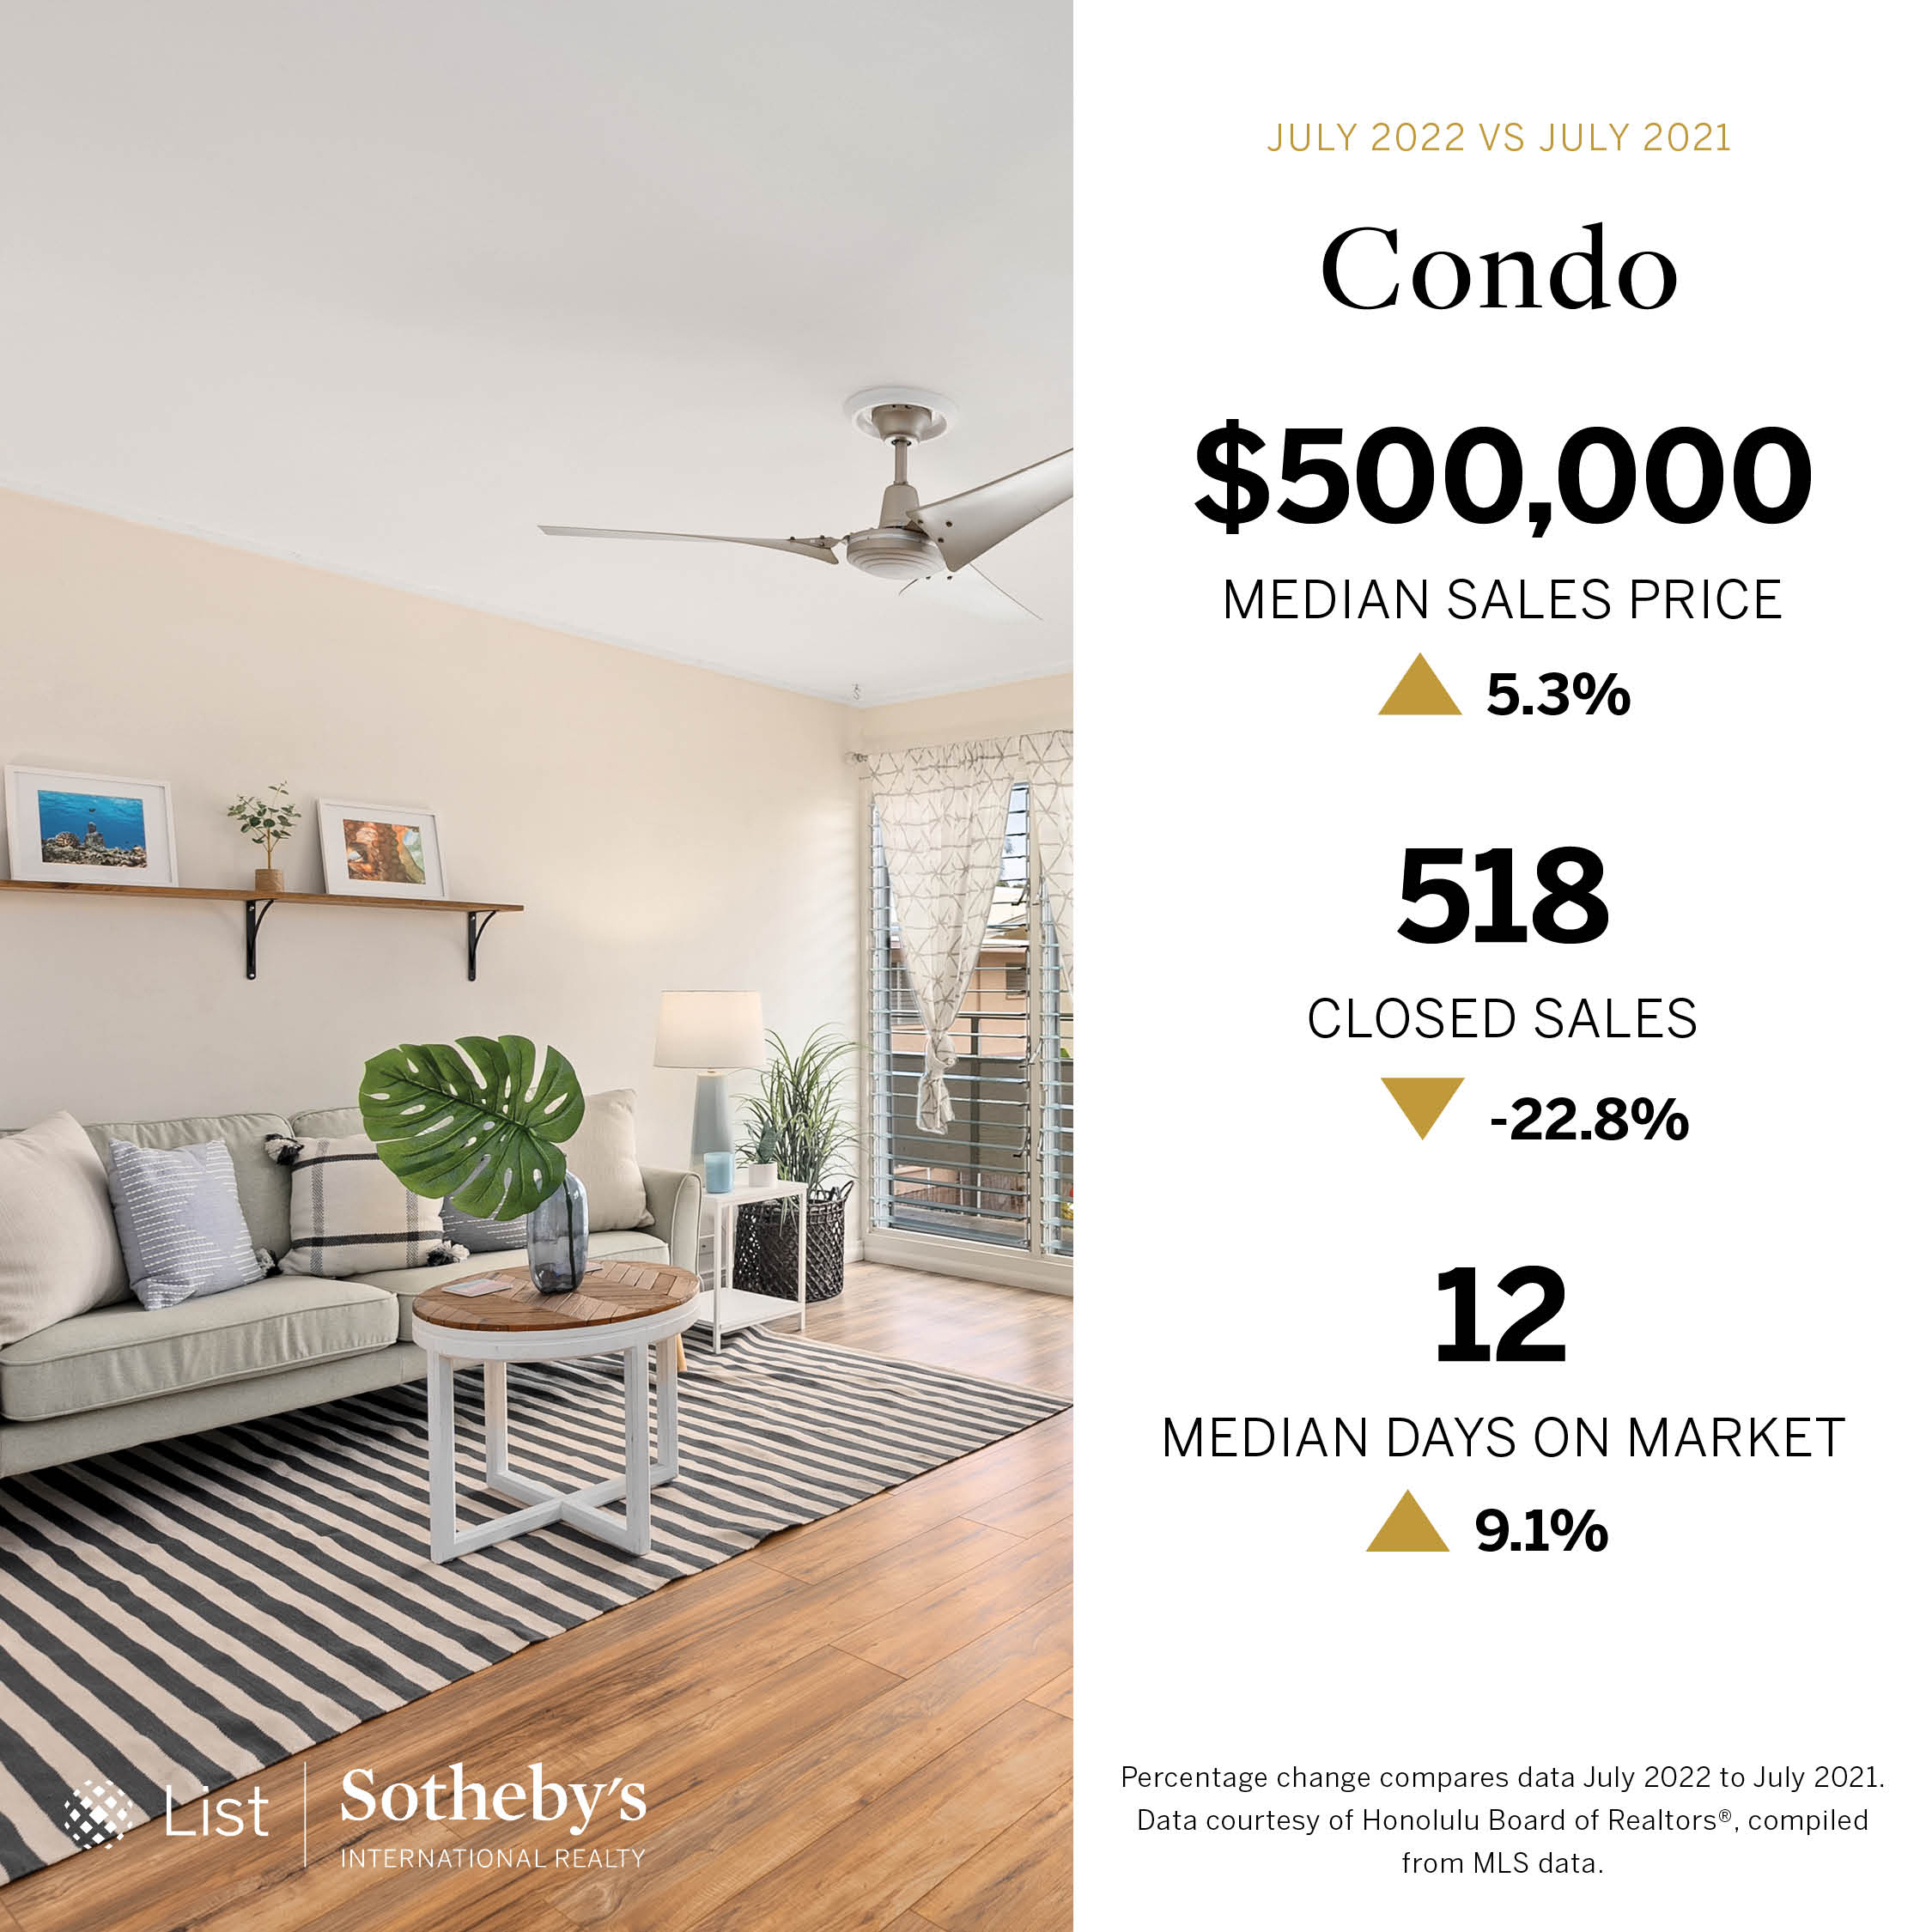 View in the living room of a condo with market stats on the right hand side